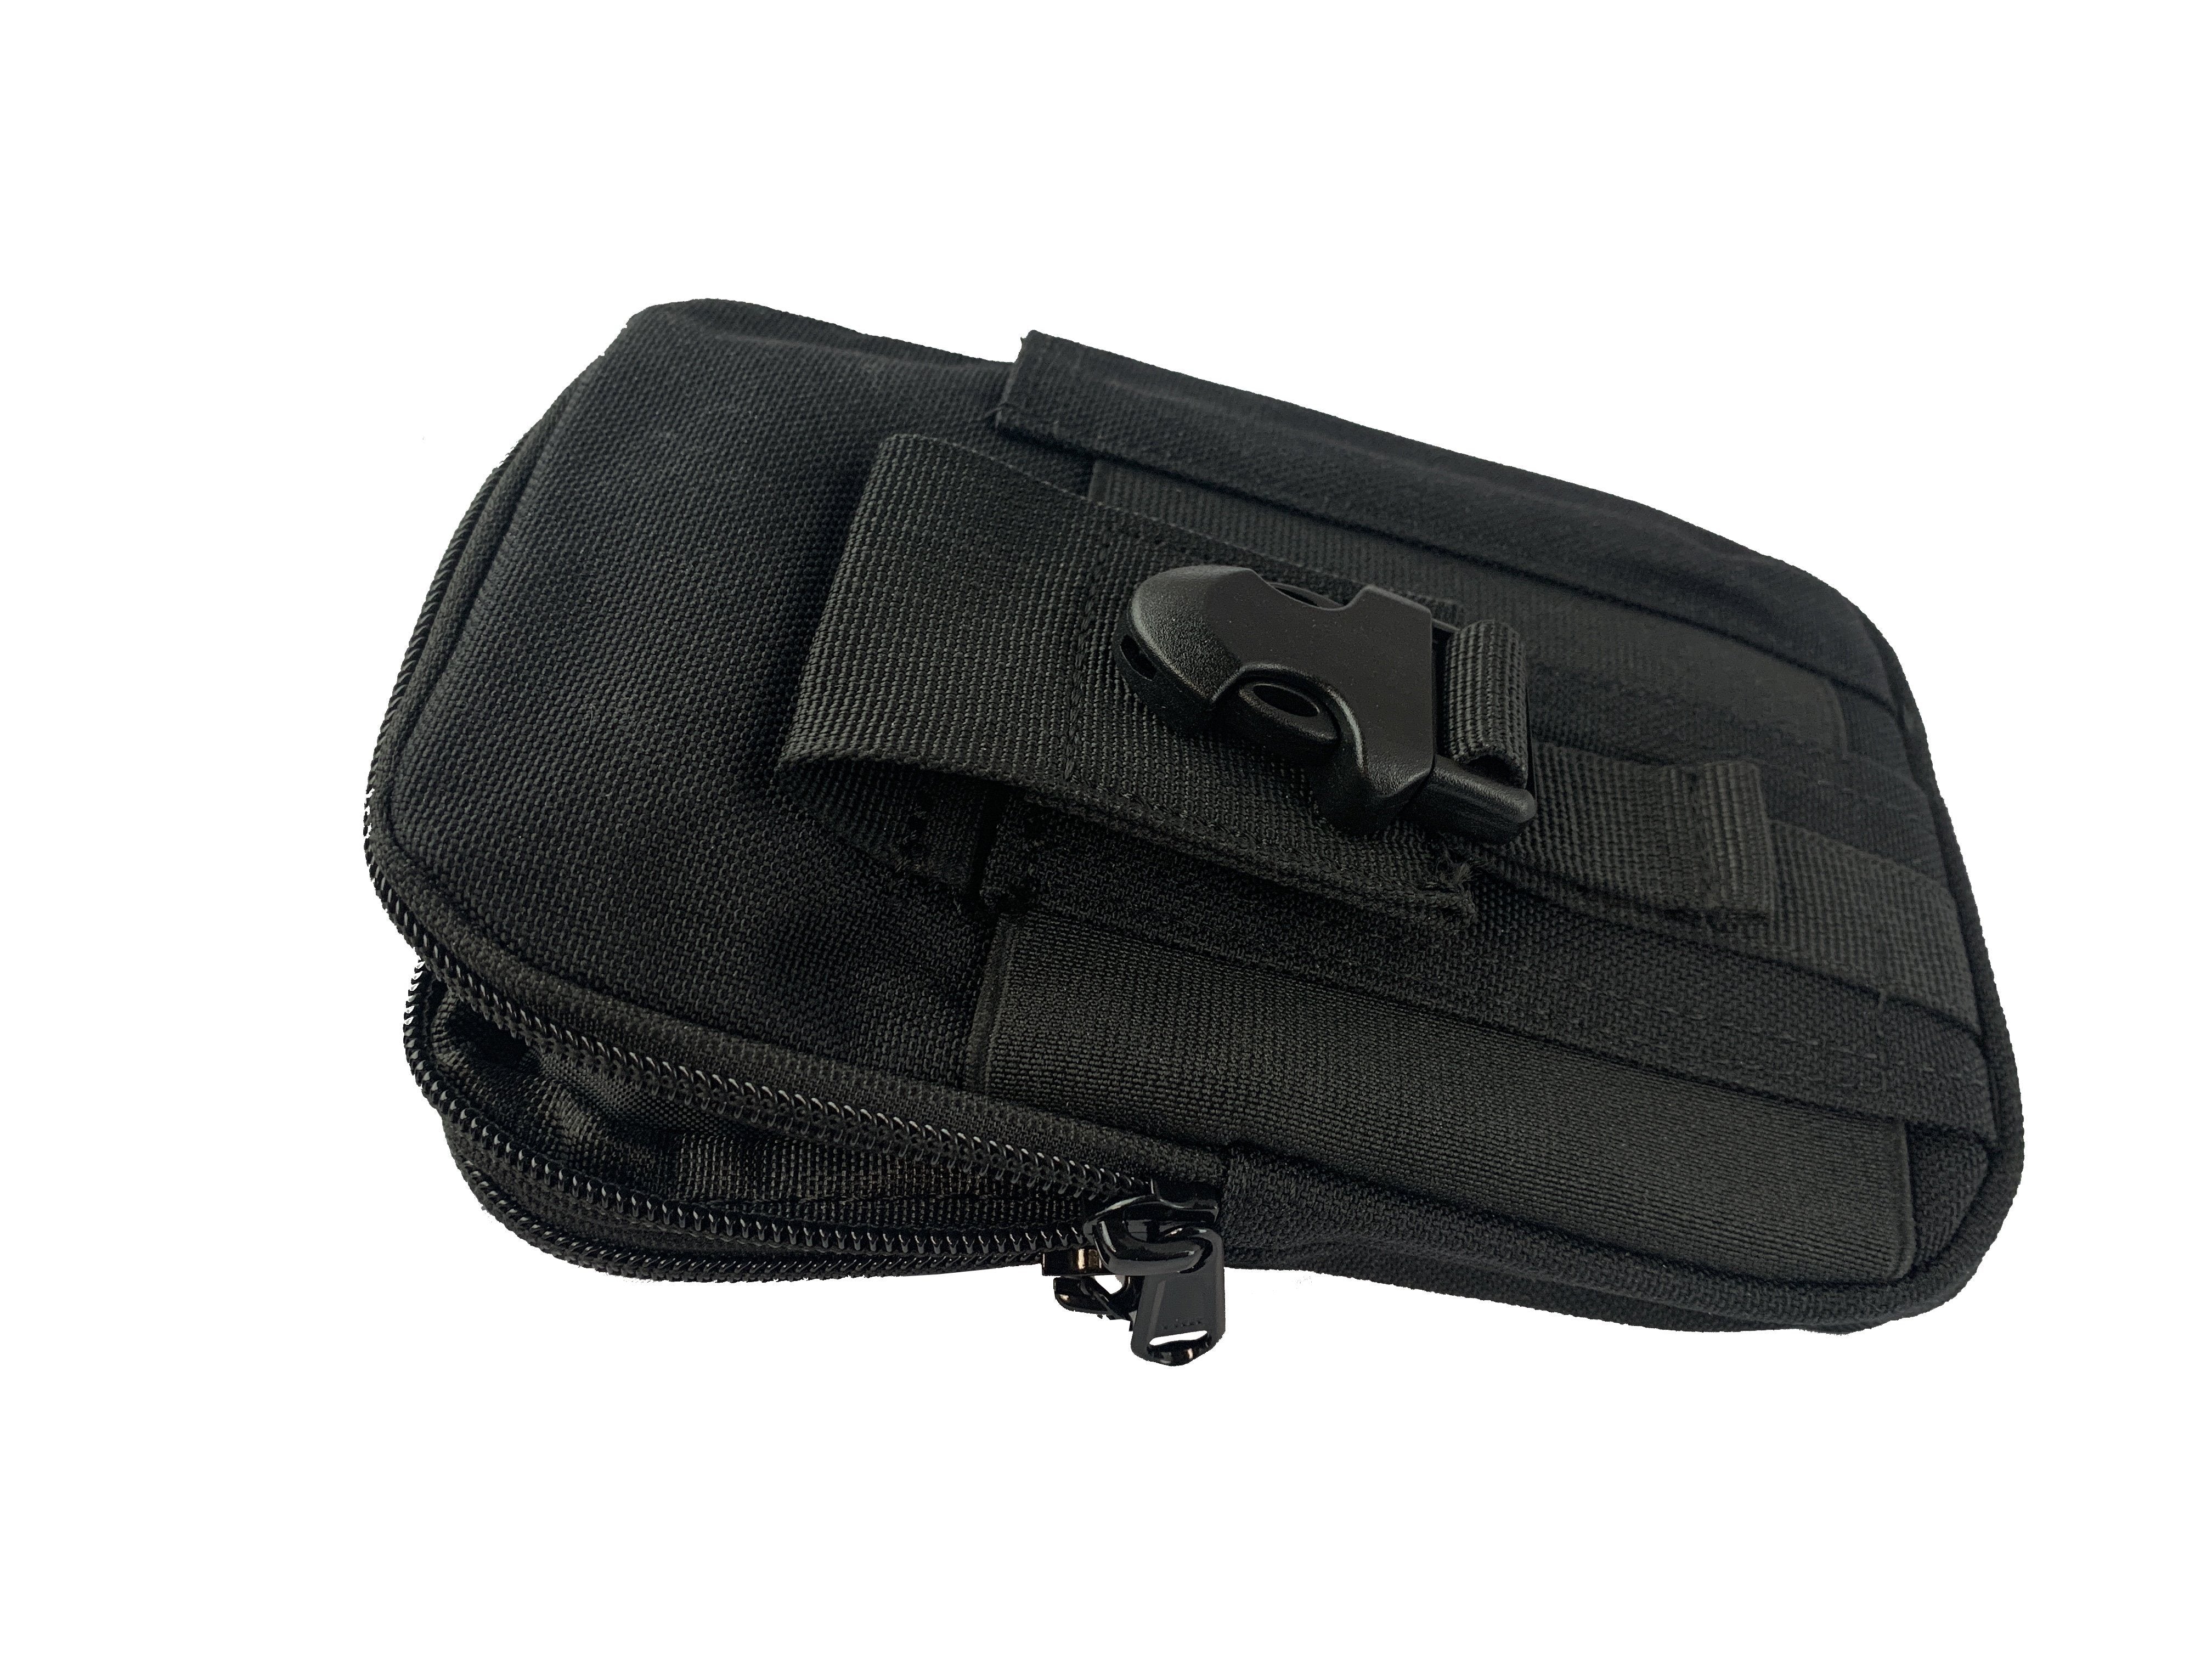 Diplomat 2 EDC Pouch with MOLLE - Vacuum Packed - CountyComm